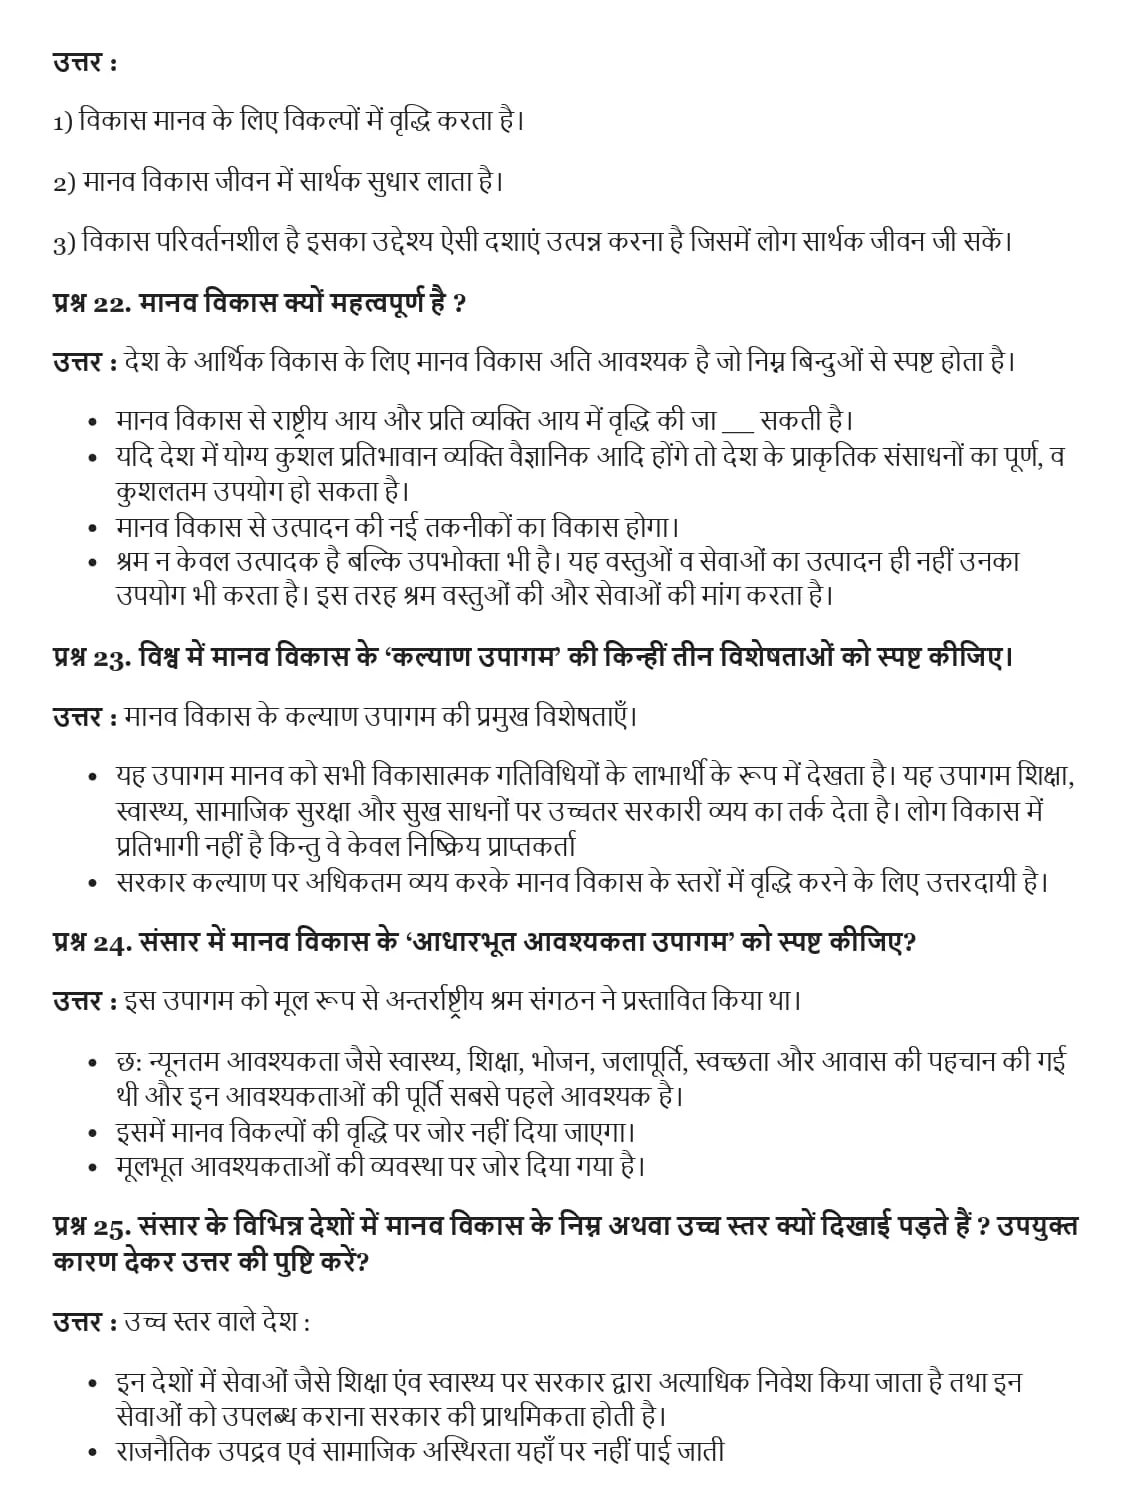 UP Board Important Questions Class 12 Chapter 4 005